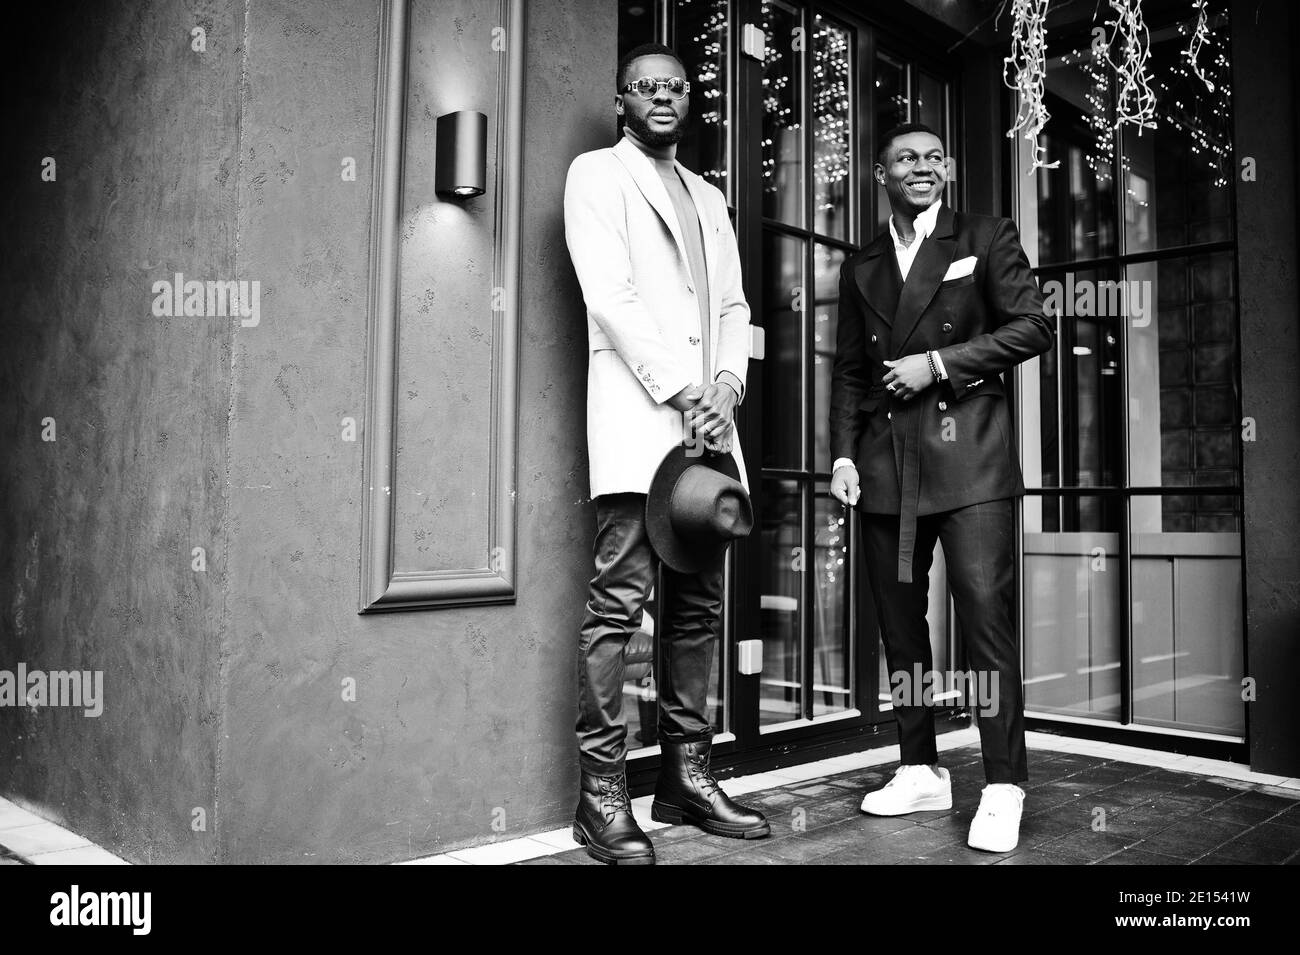 Two fashion black men pose against house with garlands. Fashionable portrait of african american male models. Wear suit, coat and hat. Stock Photo